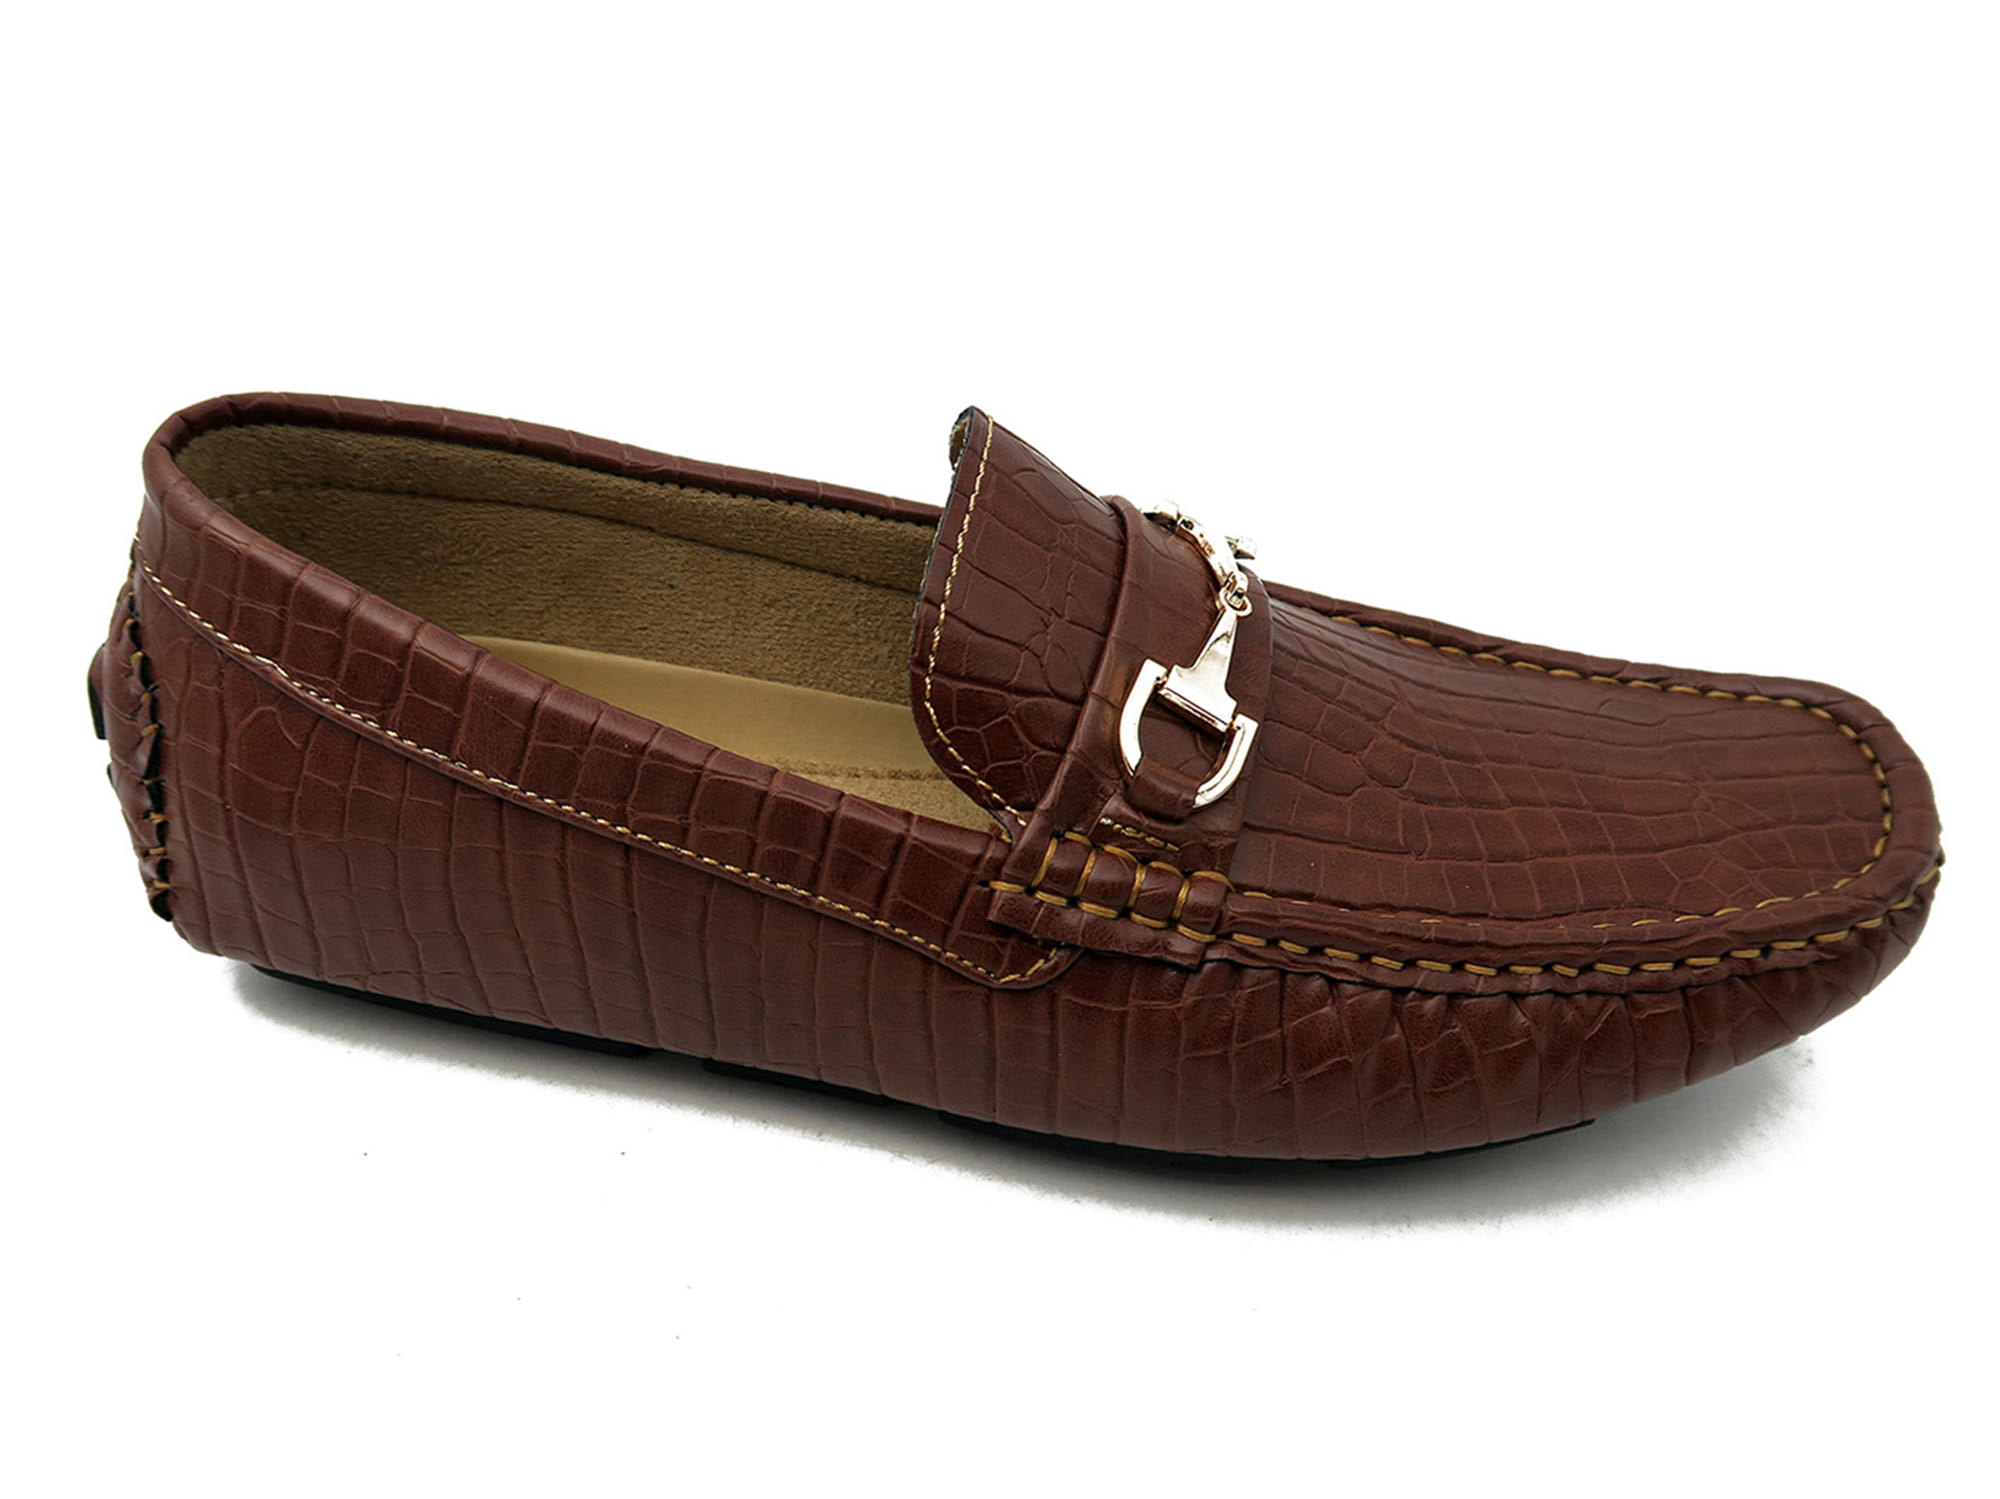 Mecca ABE Driving Loafer Moccasins Shoes - Walmart.com